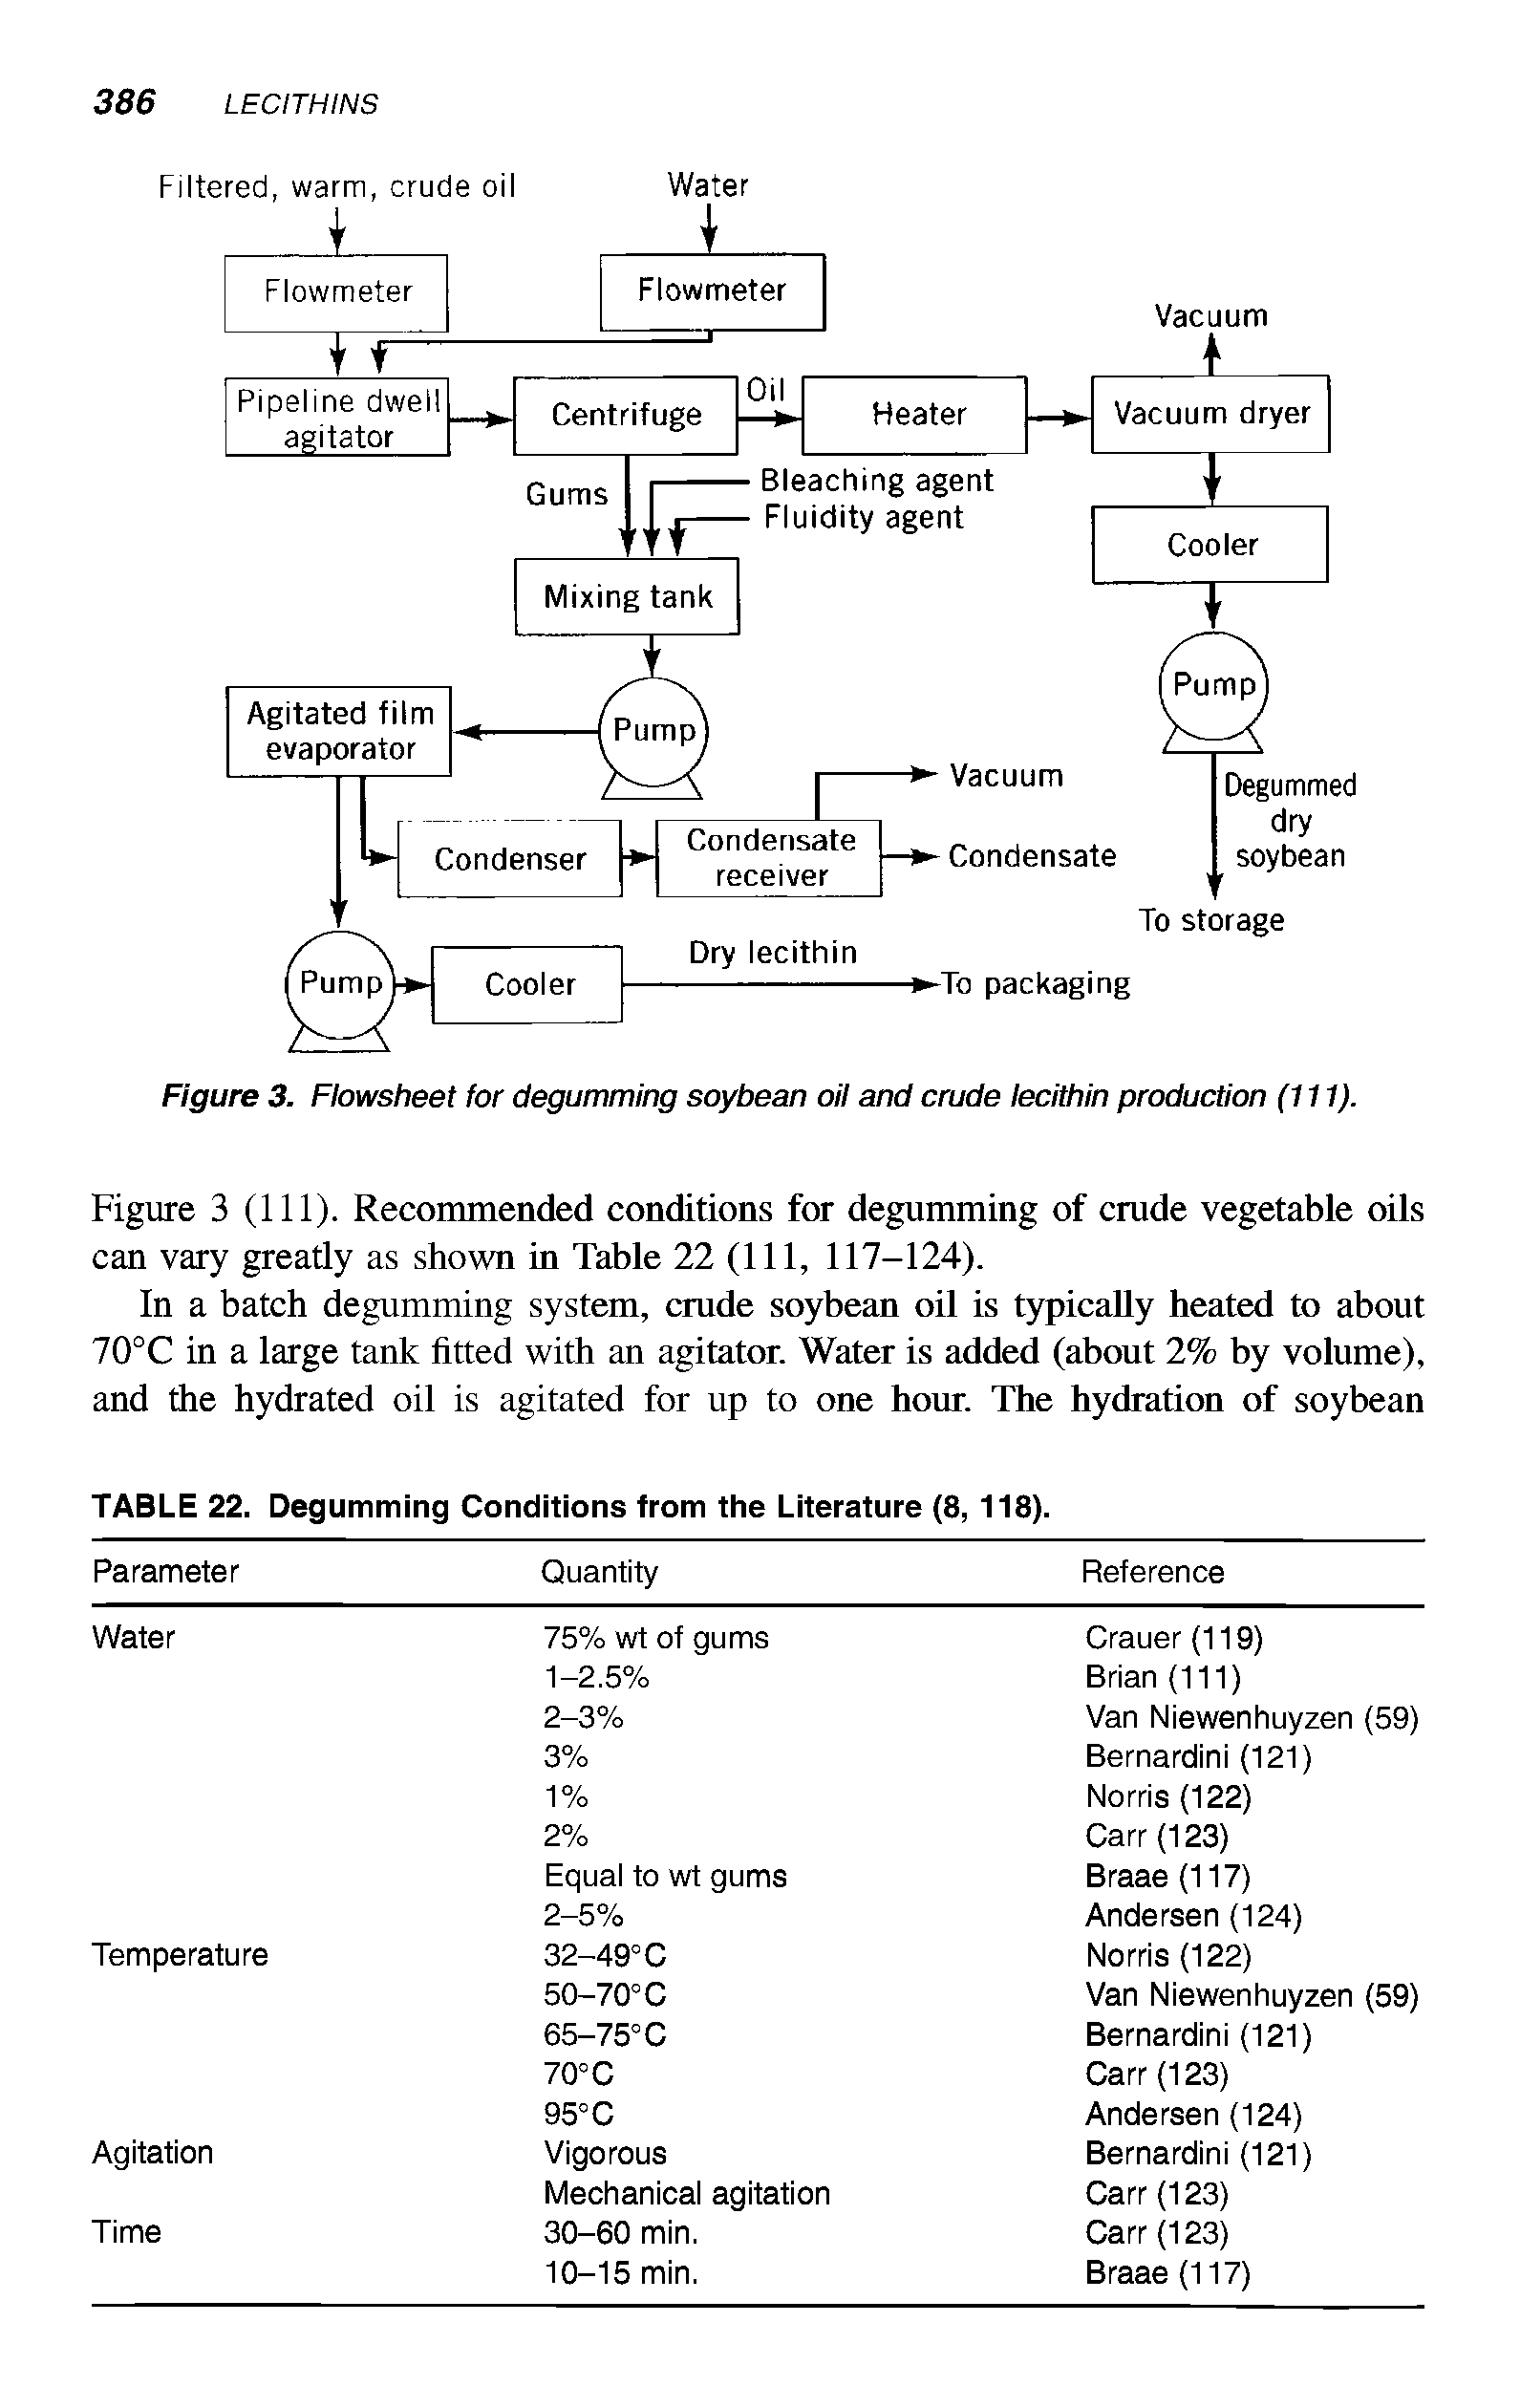 Figure 3. Flowsheet for degumming soybean oil and crude lecithin production (111).